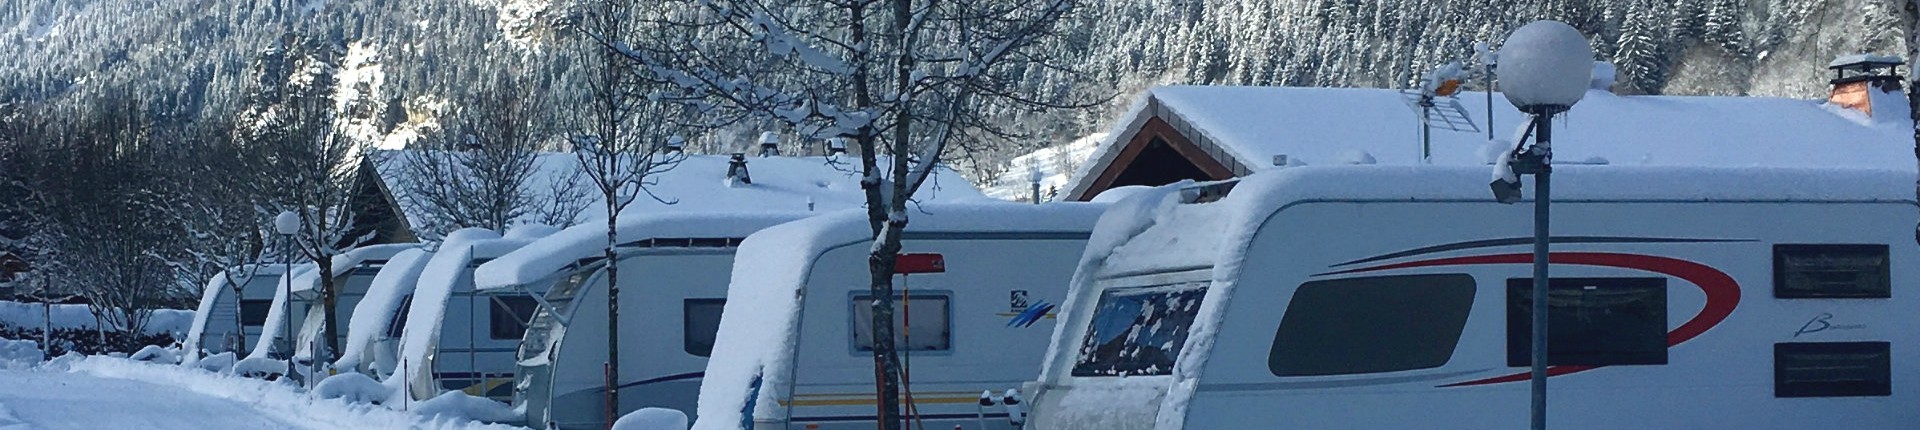 camping-l-oustalet-chatel-hiver-1-147